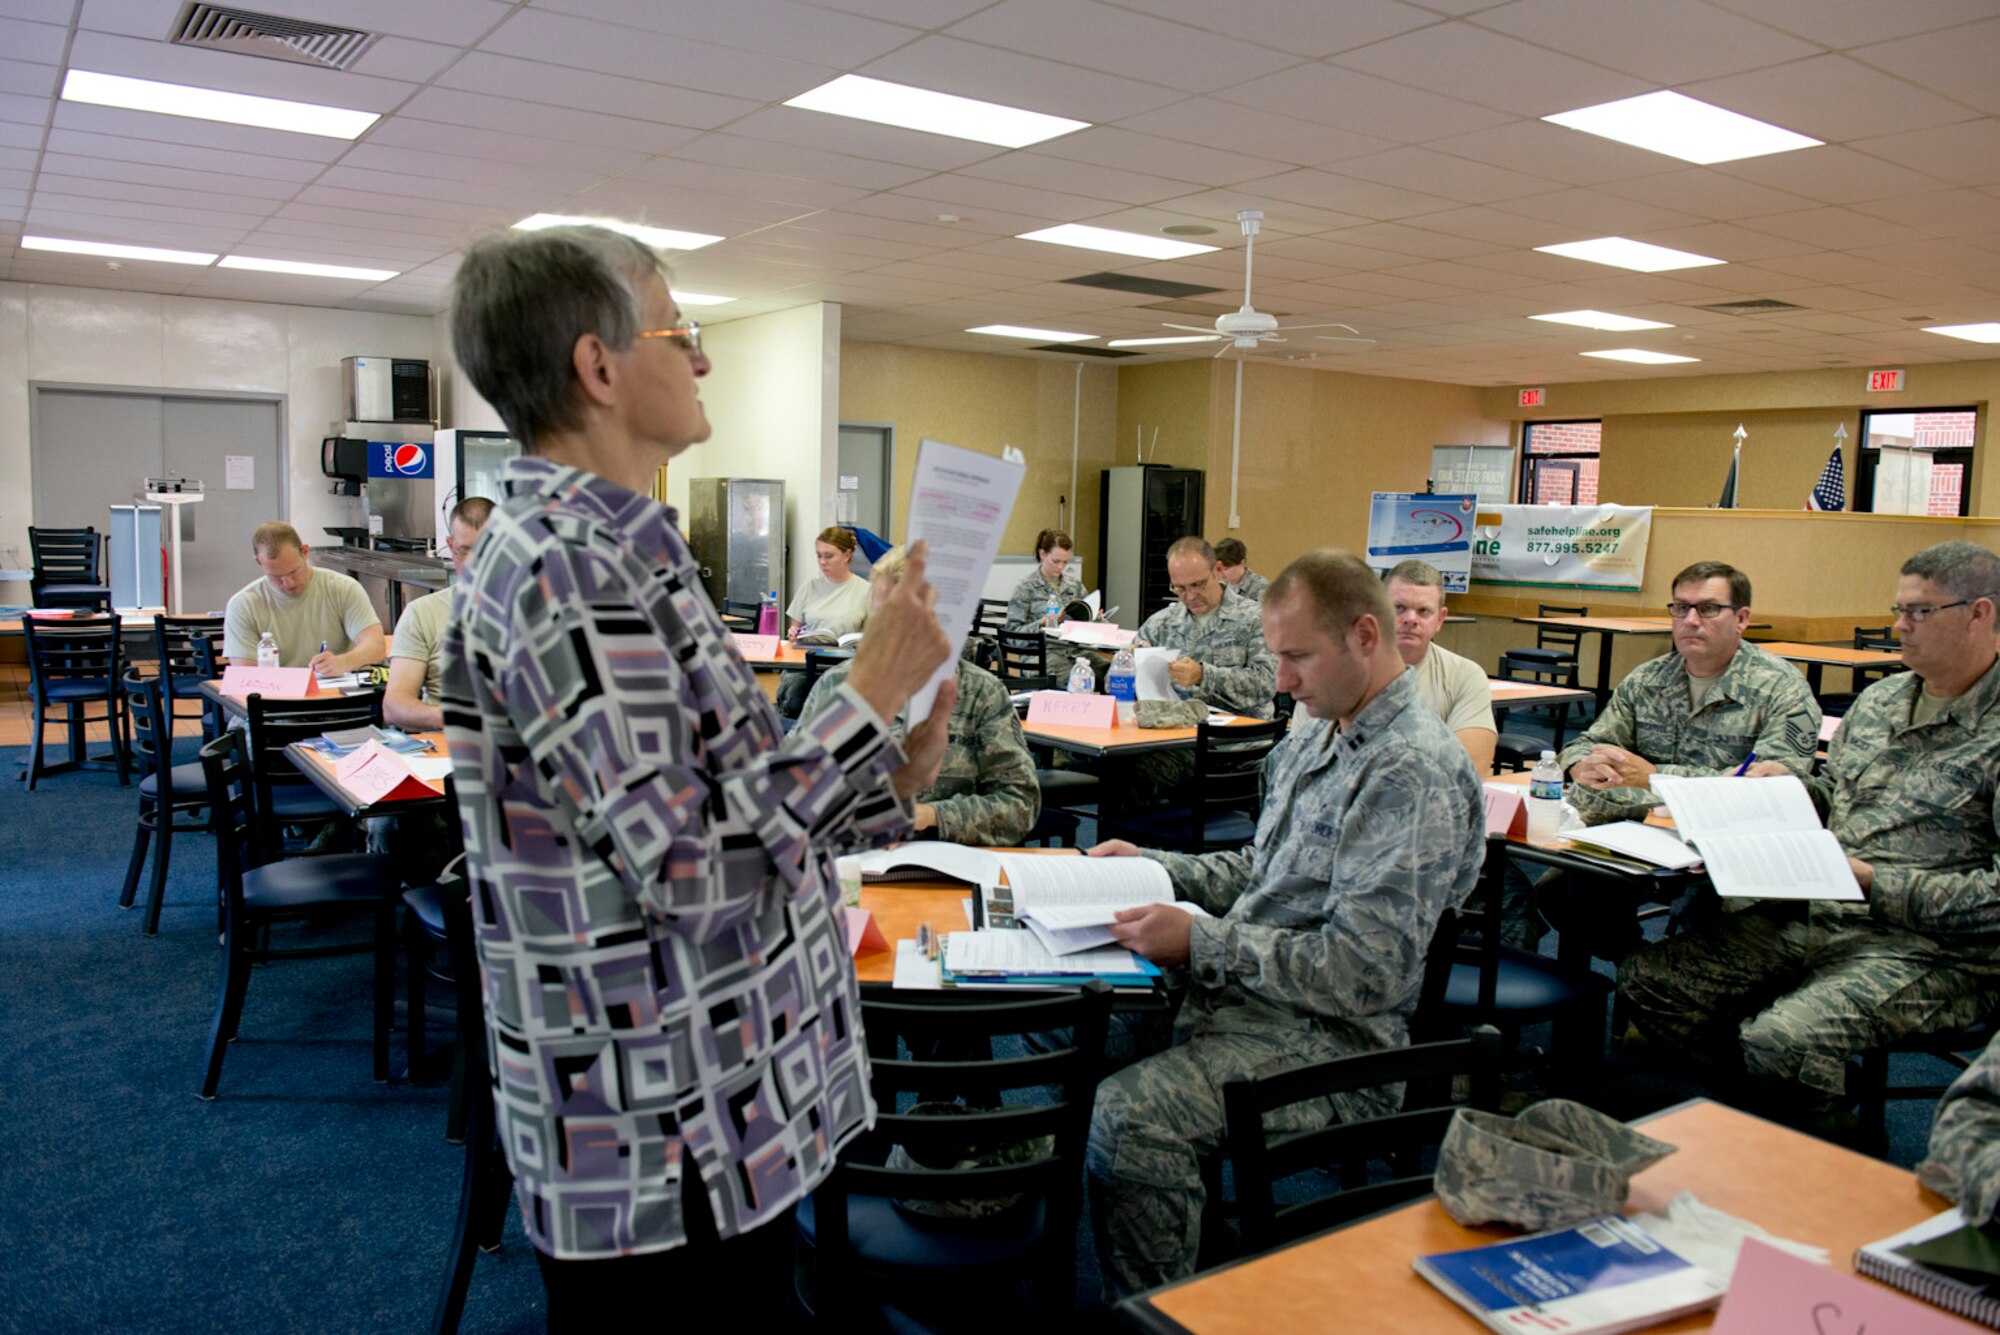 Christina Lundberg, from the West Virginia Small Business Development Center, instructs members from the 167th Airlift Wing on aspects of starting their own business during a two-day Boots to Business class that was held on base May21-22. Classes covered everything from developing a business plan to how to market a product or service. (Air National Guard photo by Master Sgt. Emily Beightol-Deyerle)